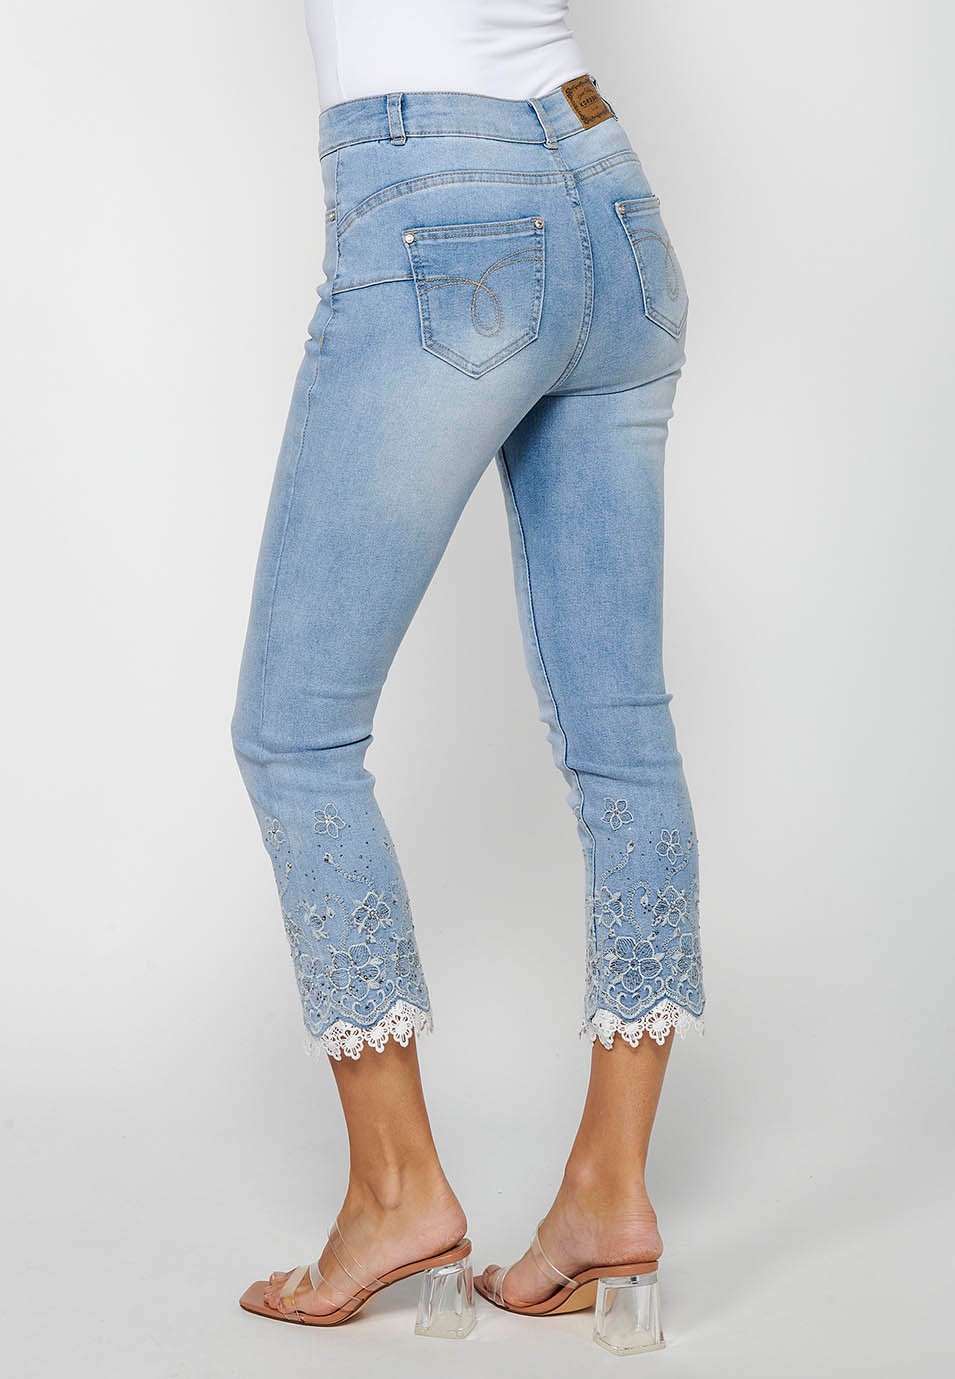 Long slim jeans pants with front zipper closure and light blue floral embroidered details for women 8